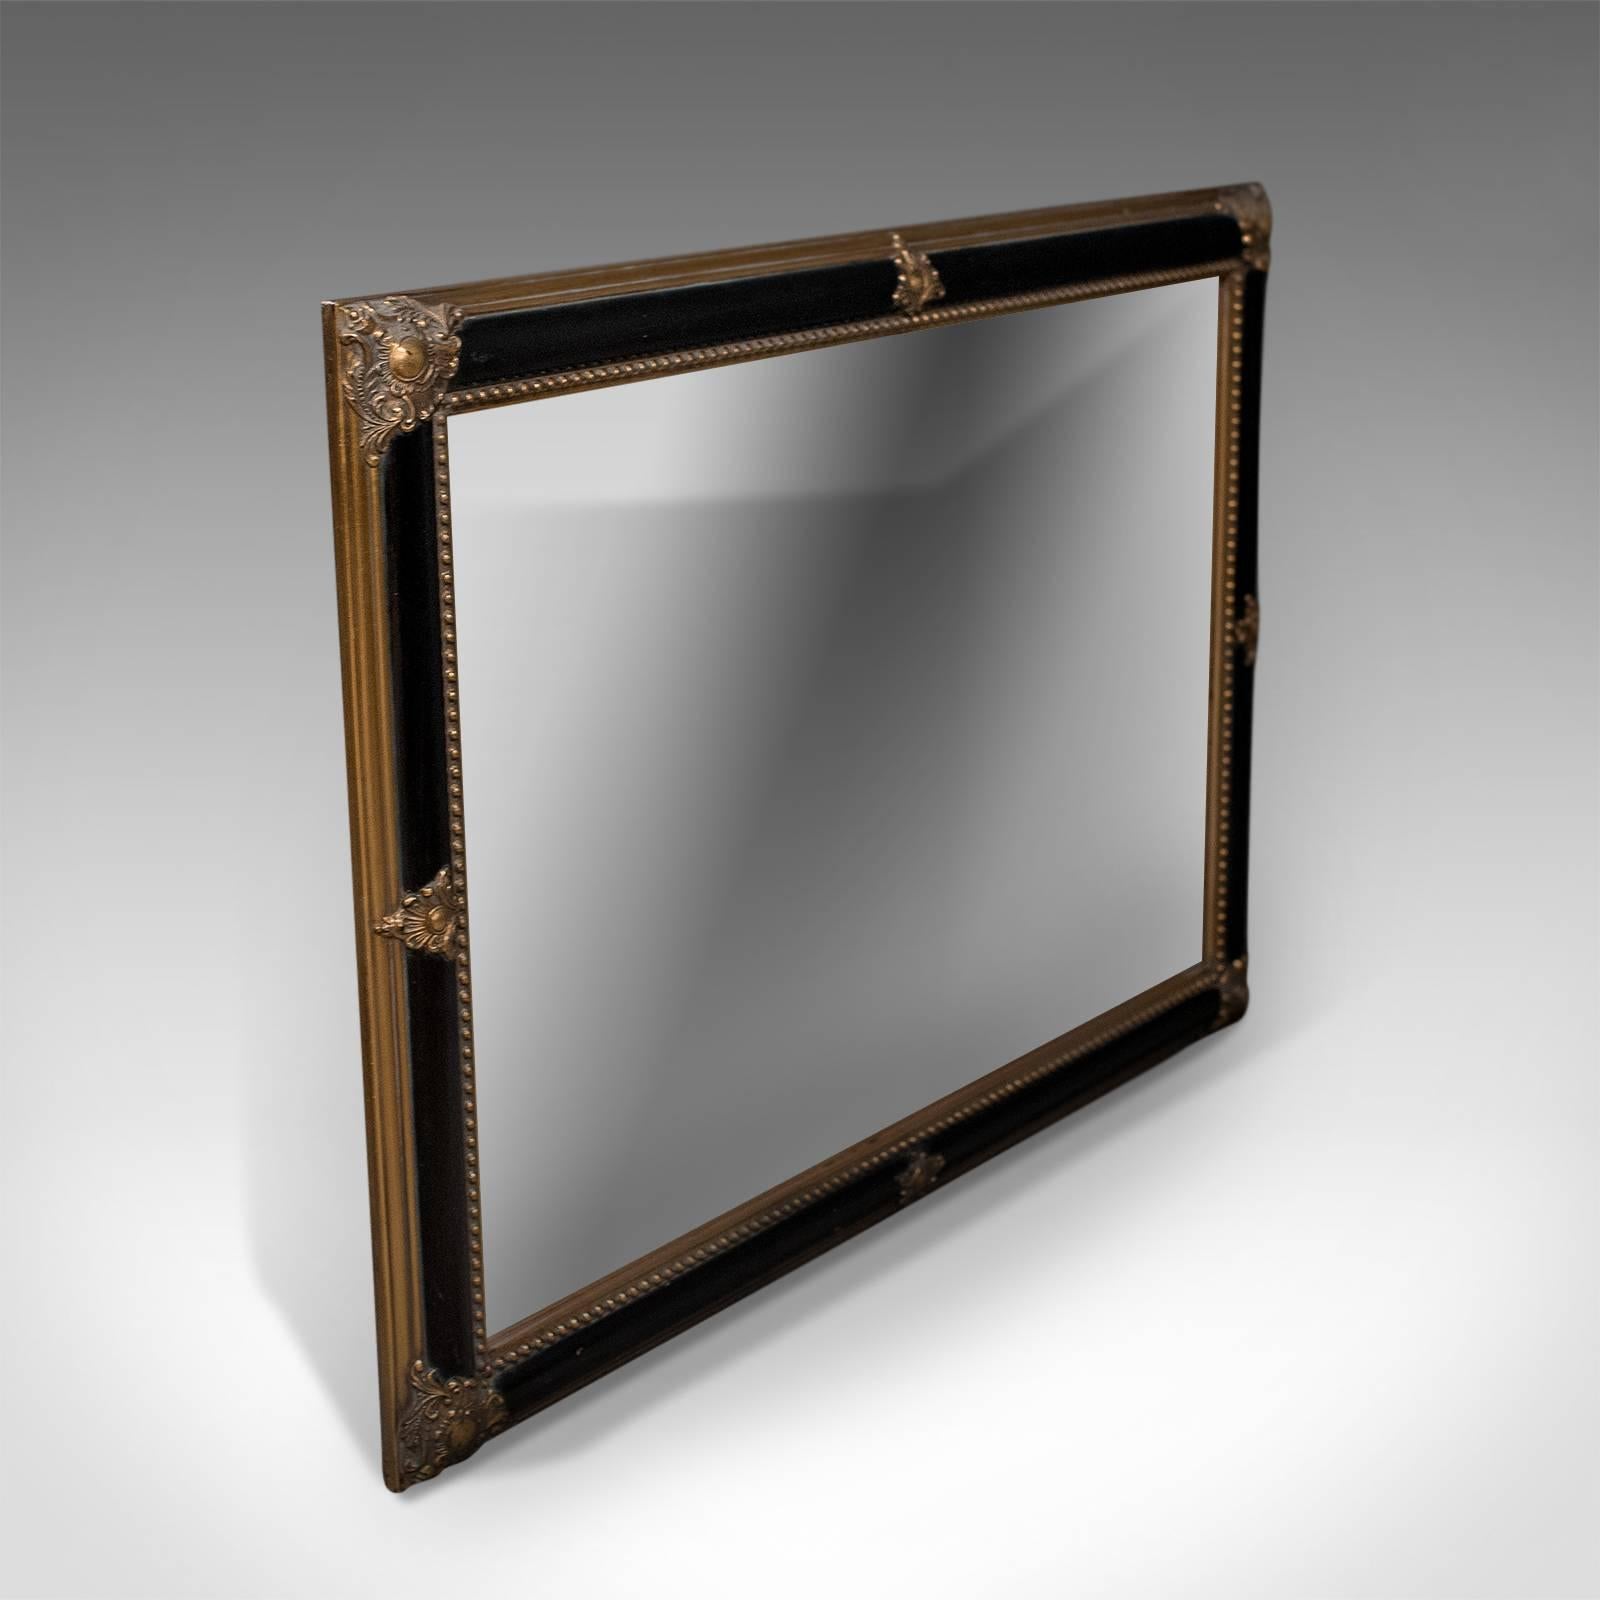 This is a Regency revival wall mirror. A quality item of decorative furniture made in the late 20th century.

Attractive ebonized finish to the giltwood frame
A refined piece made in the Regency taste
Mid-sized in good proportion and